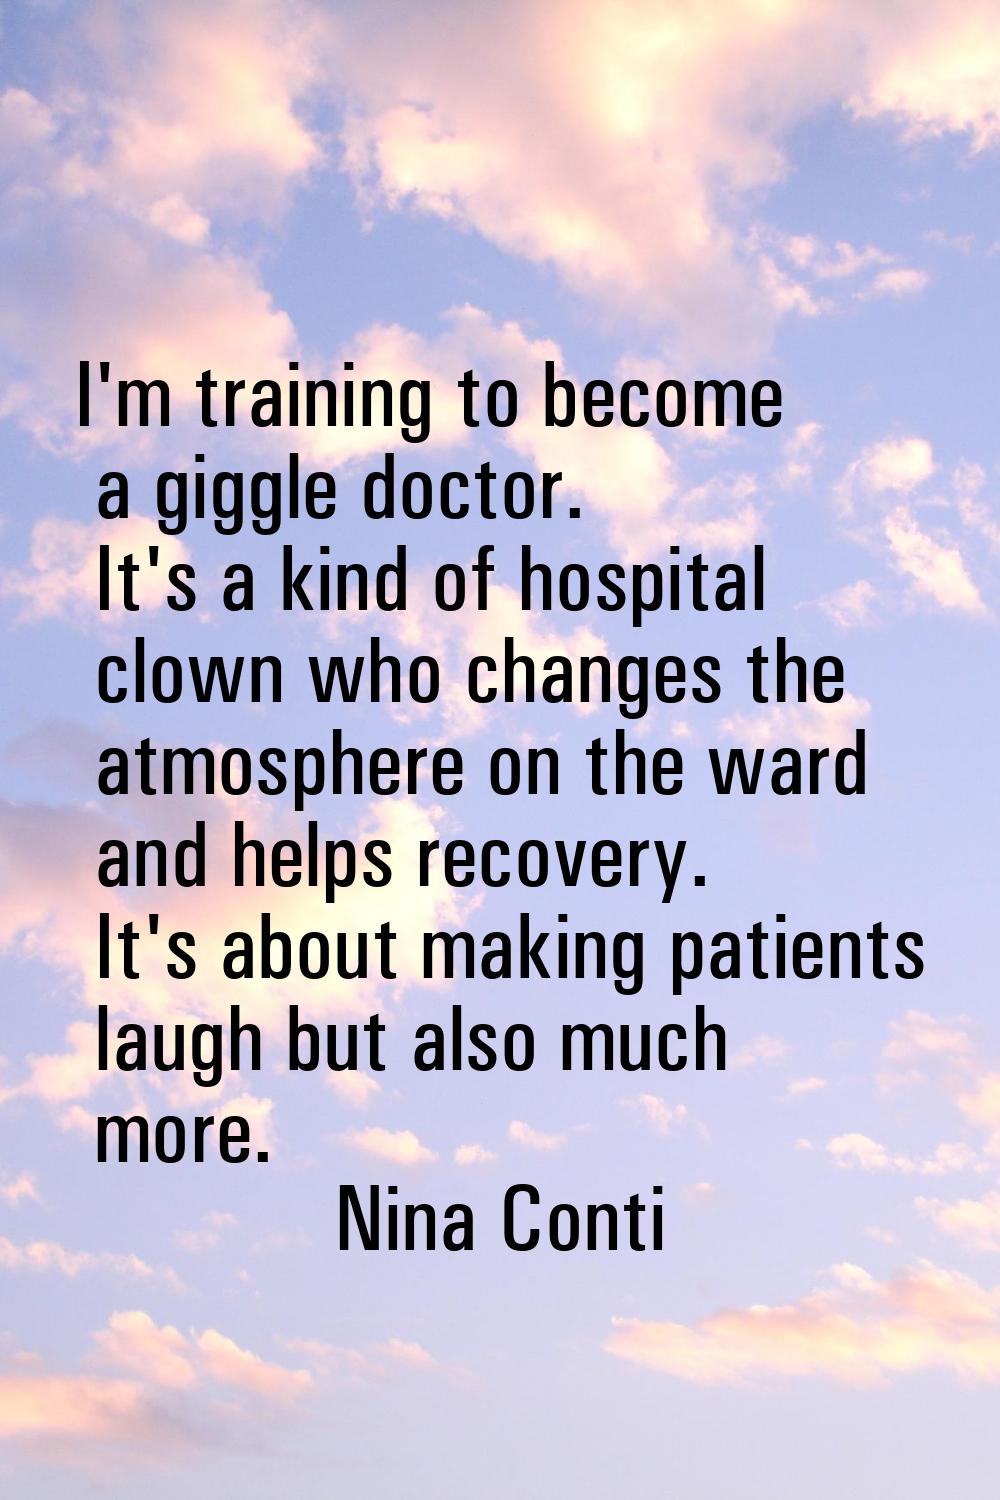 I'm training to become a giggle doctor. It's a kind of hospital clown who changes the atmosphere on